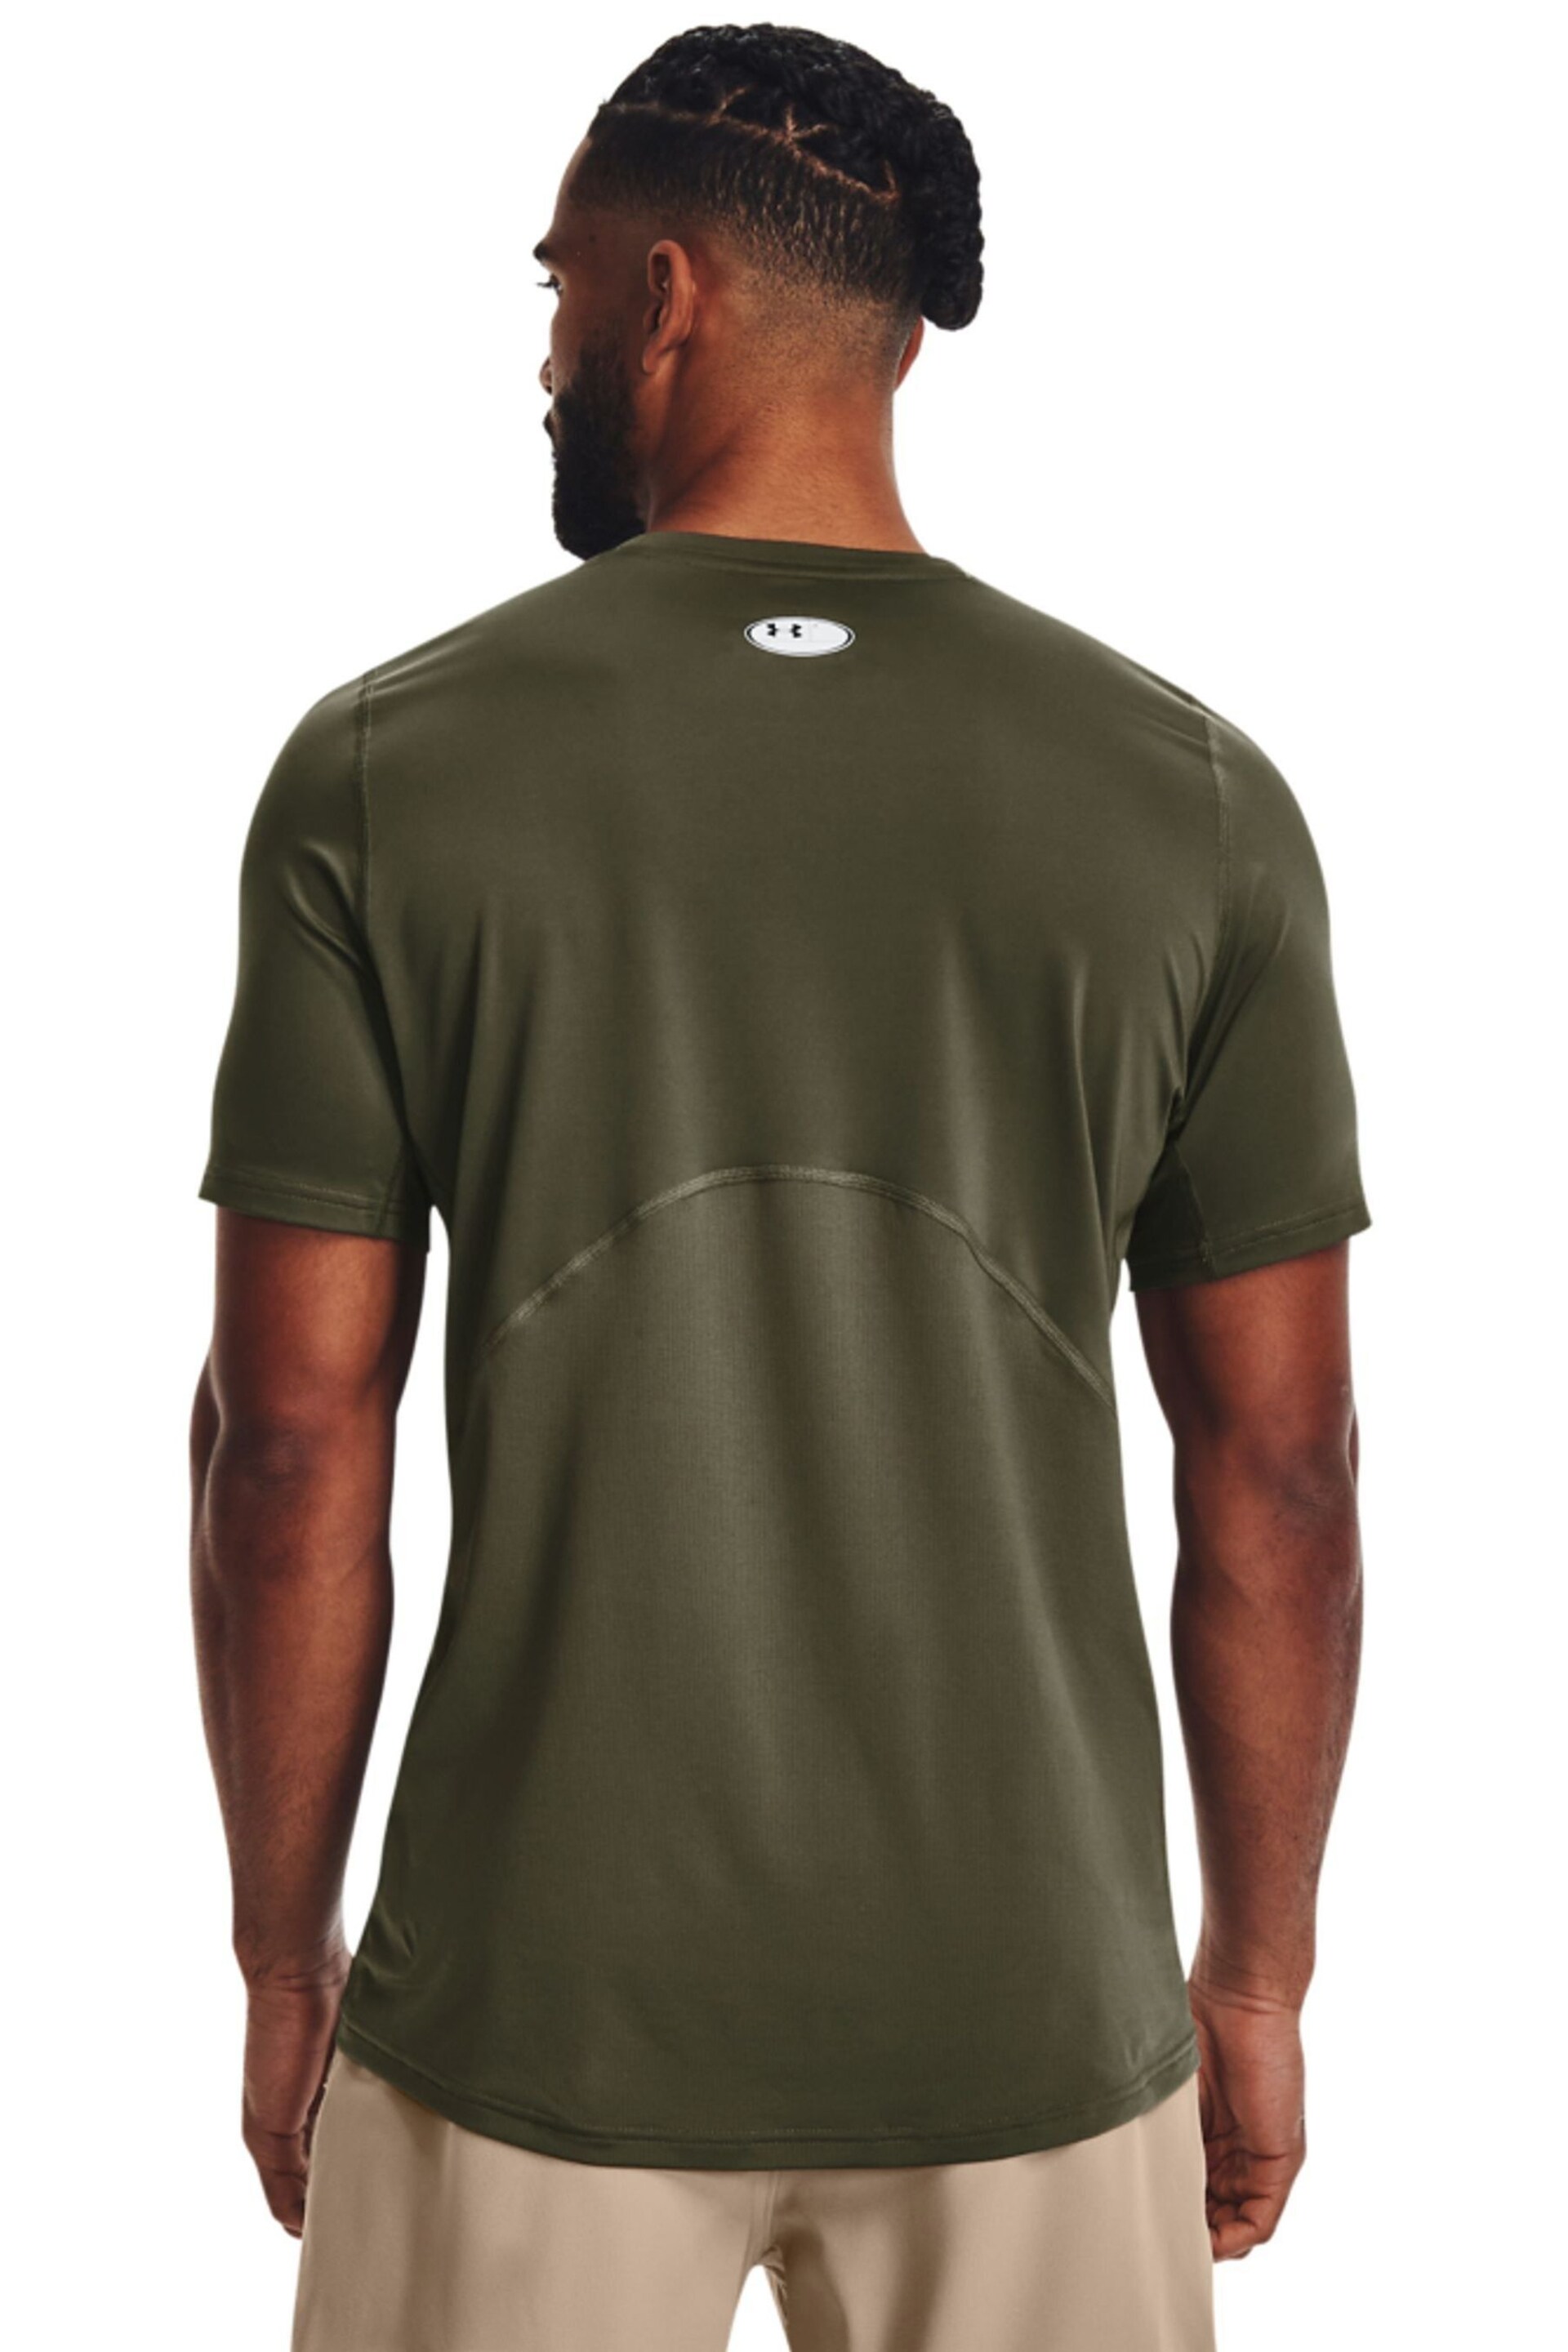 Under Armour Green Heat Gear Fitted T-Shirt - Image 3 of 6